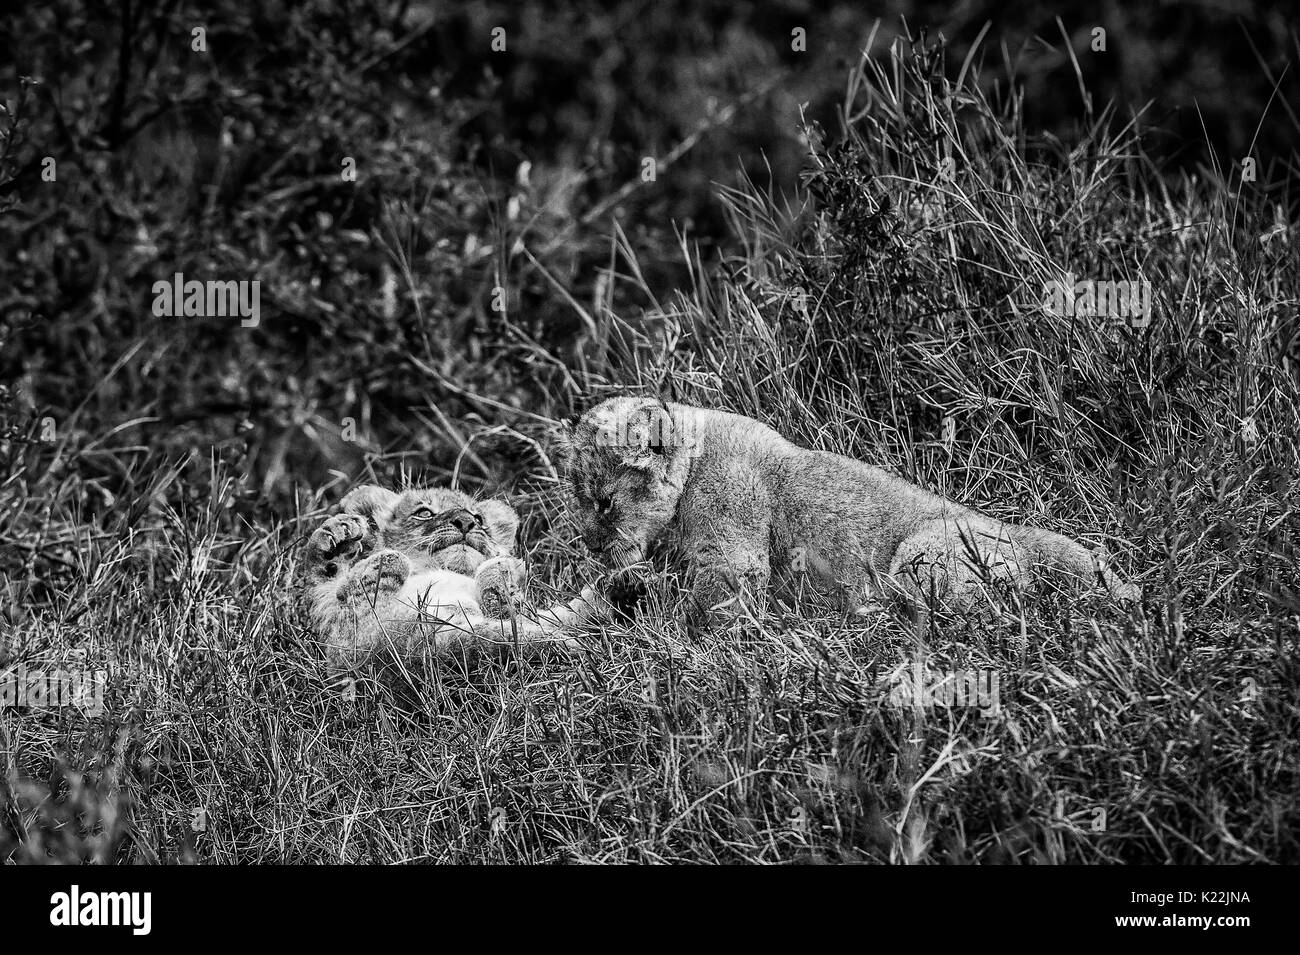 Park Masai Mara, Kenya, Africa  Two lion cubs photographed while playing in the grass Stock Photo